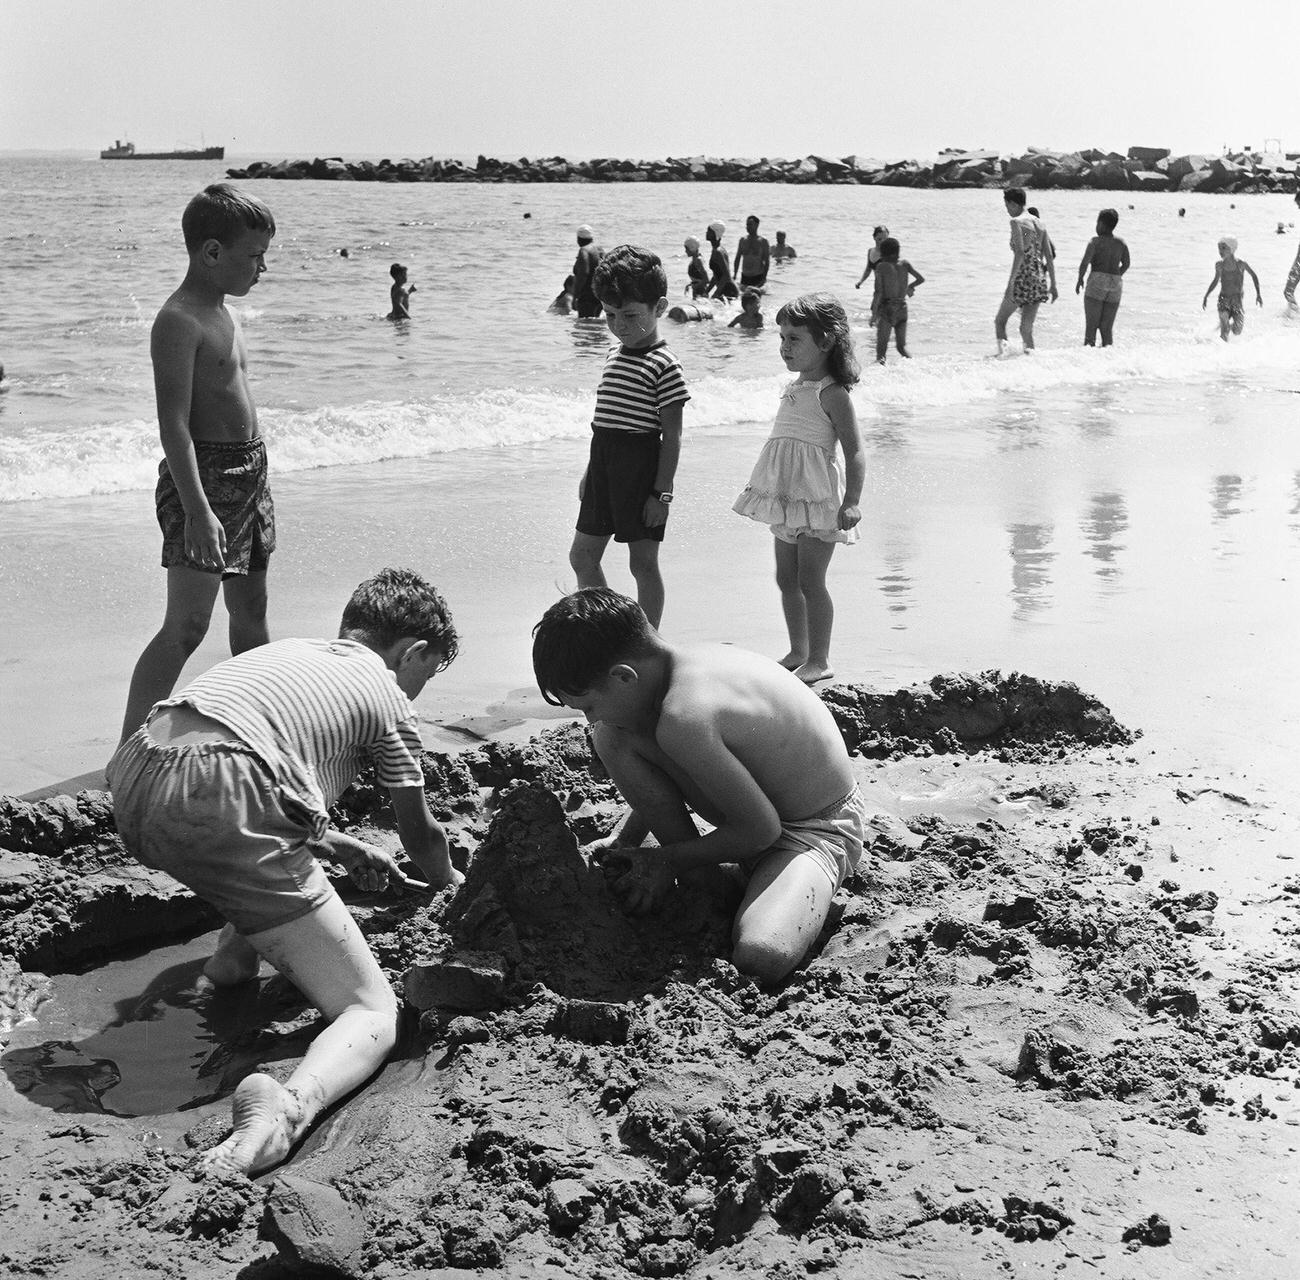 Children Build Sand Castles And Play On Coney Island Beach, 1948